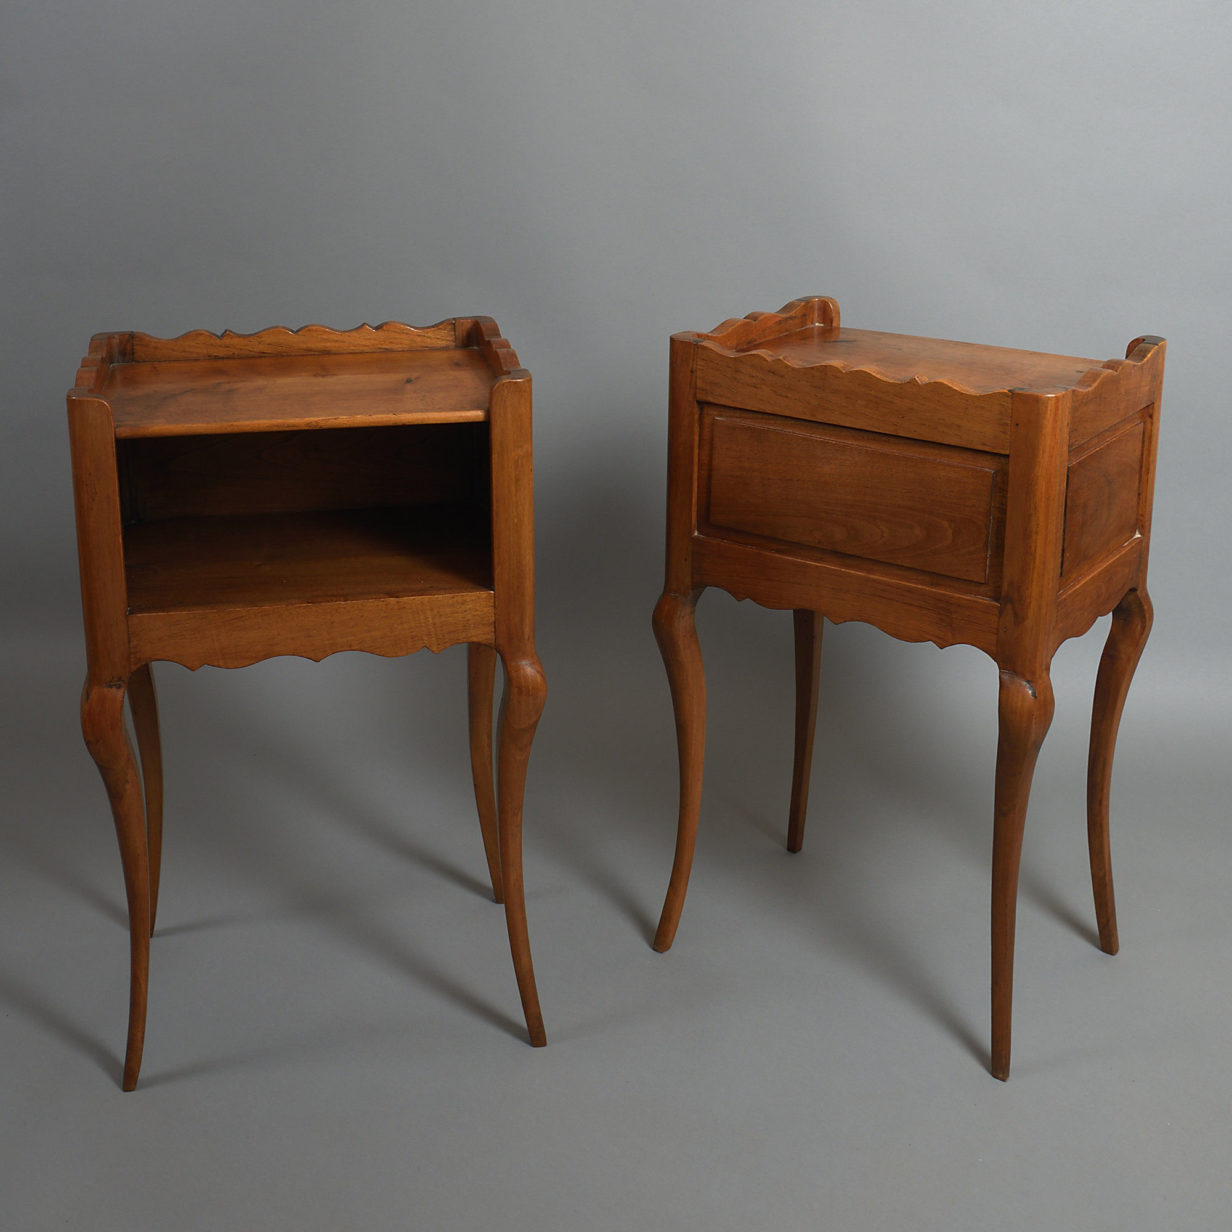 20th century pair of rococo bedside tables